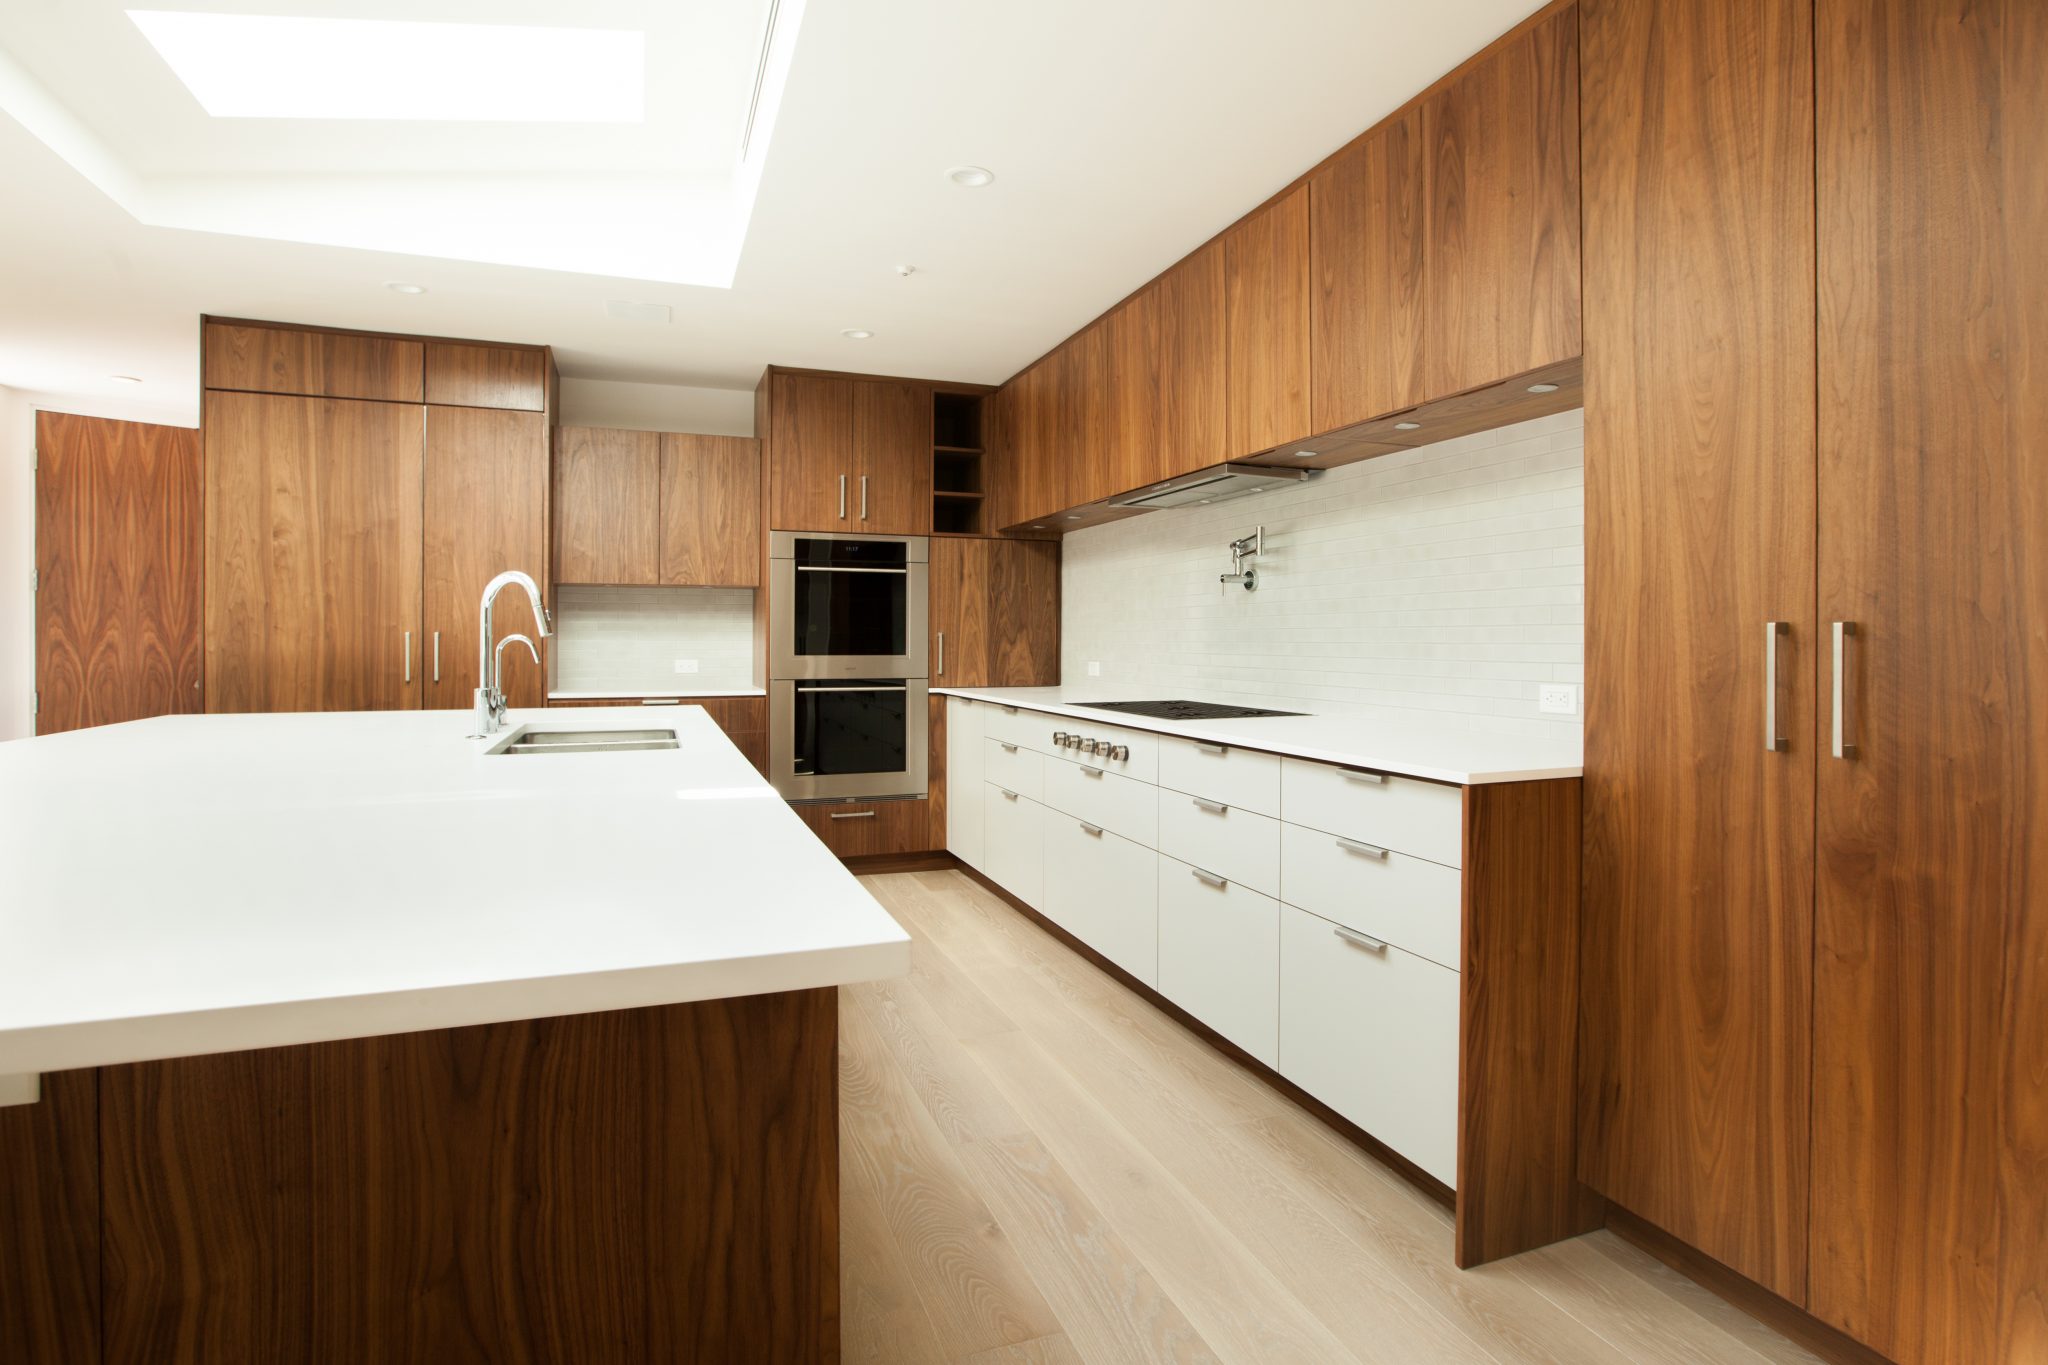 Mid Century Modern Kitchen Remodel by Hauser Houses San Diego, California Licensed Contractors